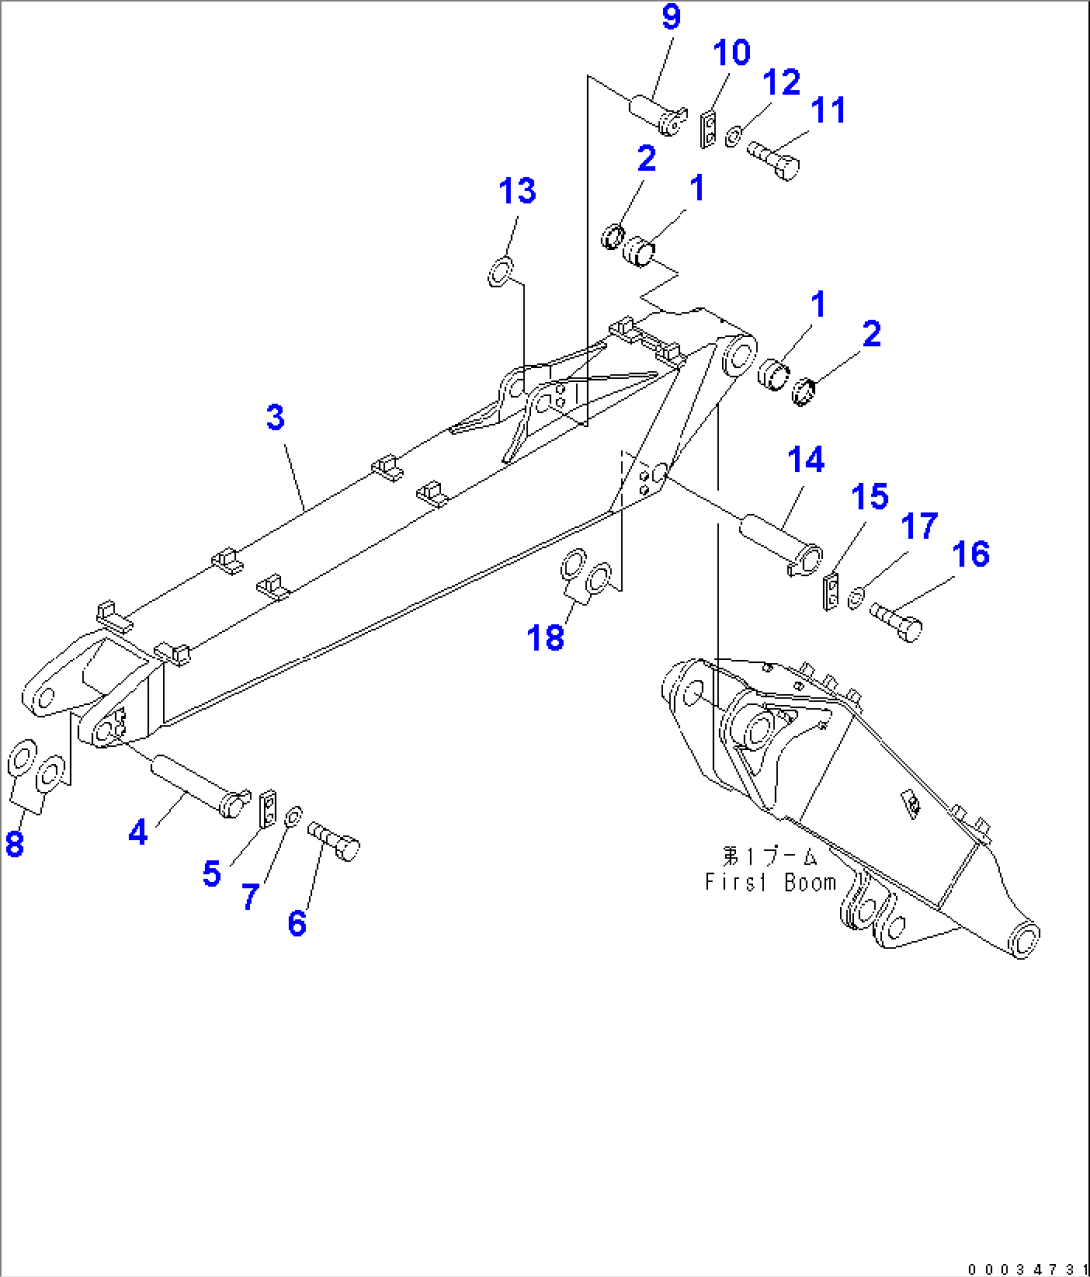 2-PIECE BOOM (FOR ROTARY ARM)